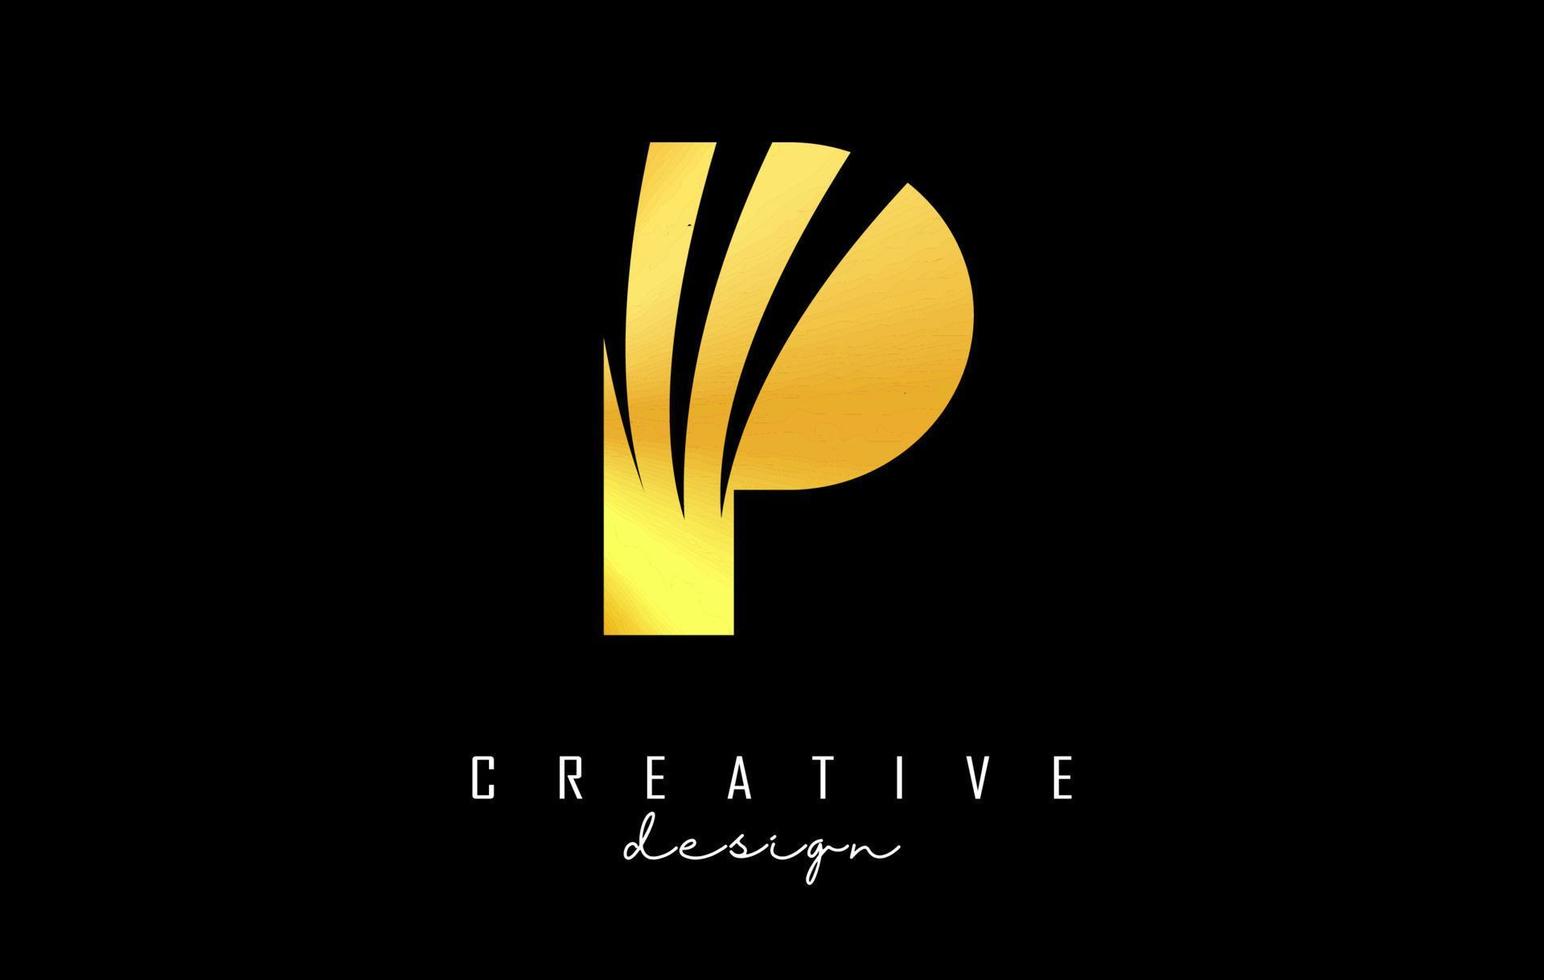 Golden letter P logo with leading lines and negative space design. Letter with geometric and creative cuts concept. vector